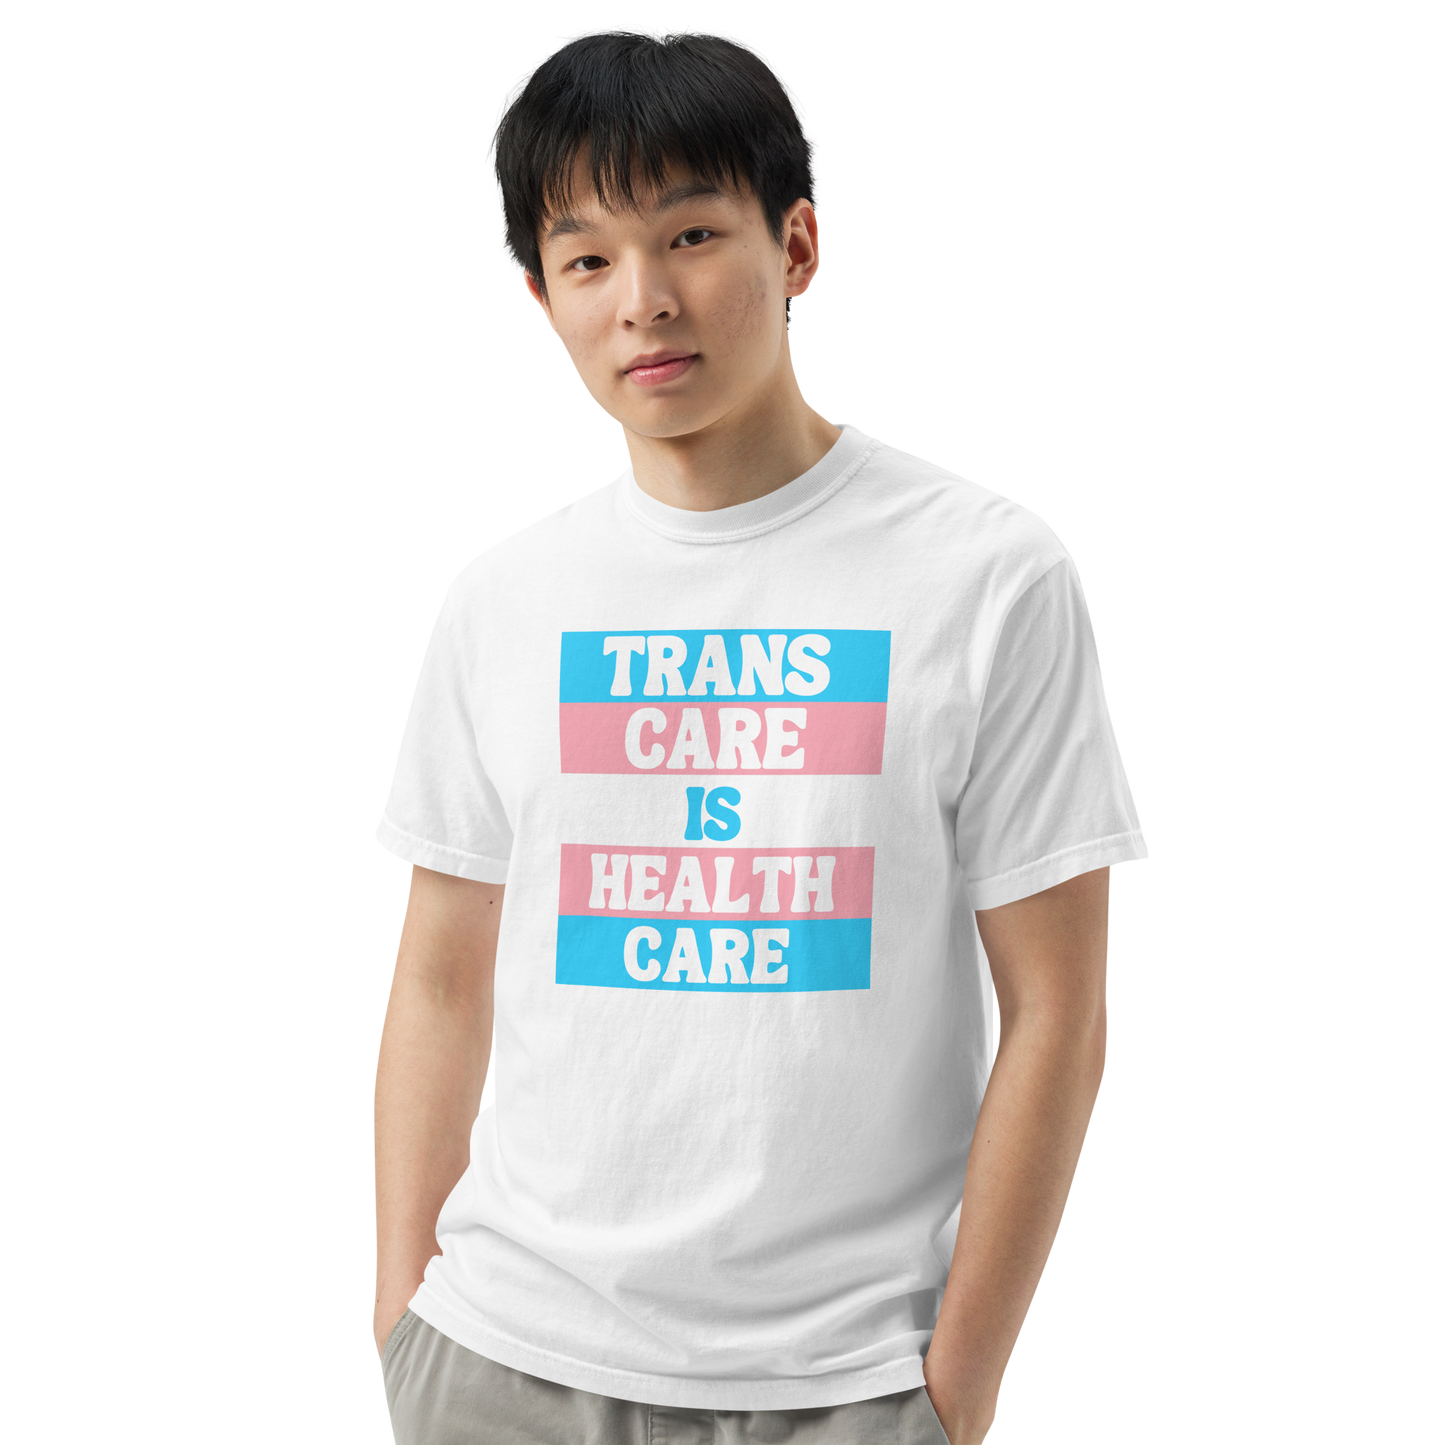 Trans Care is Health Care Unisex T-shirt Modeled on Man